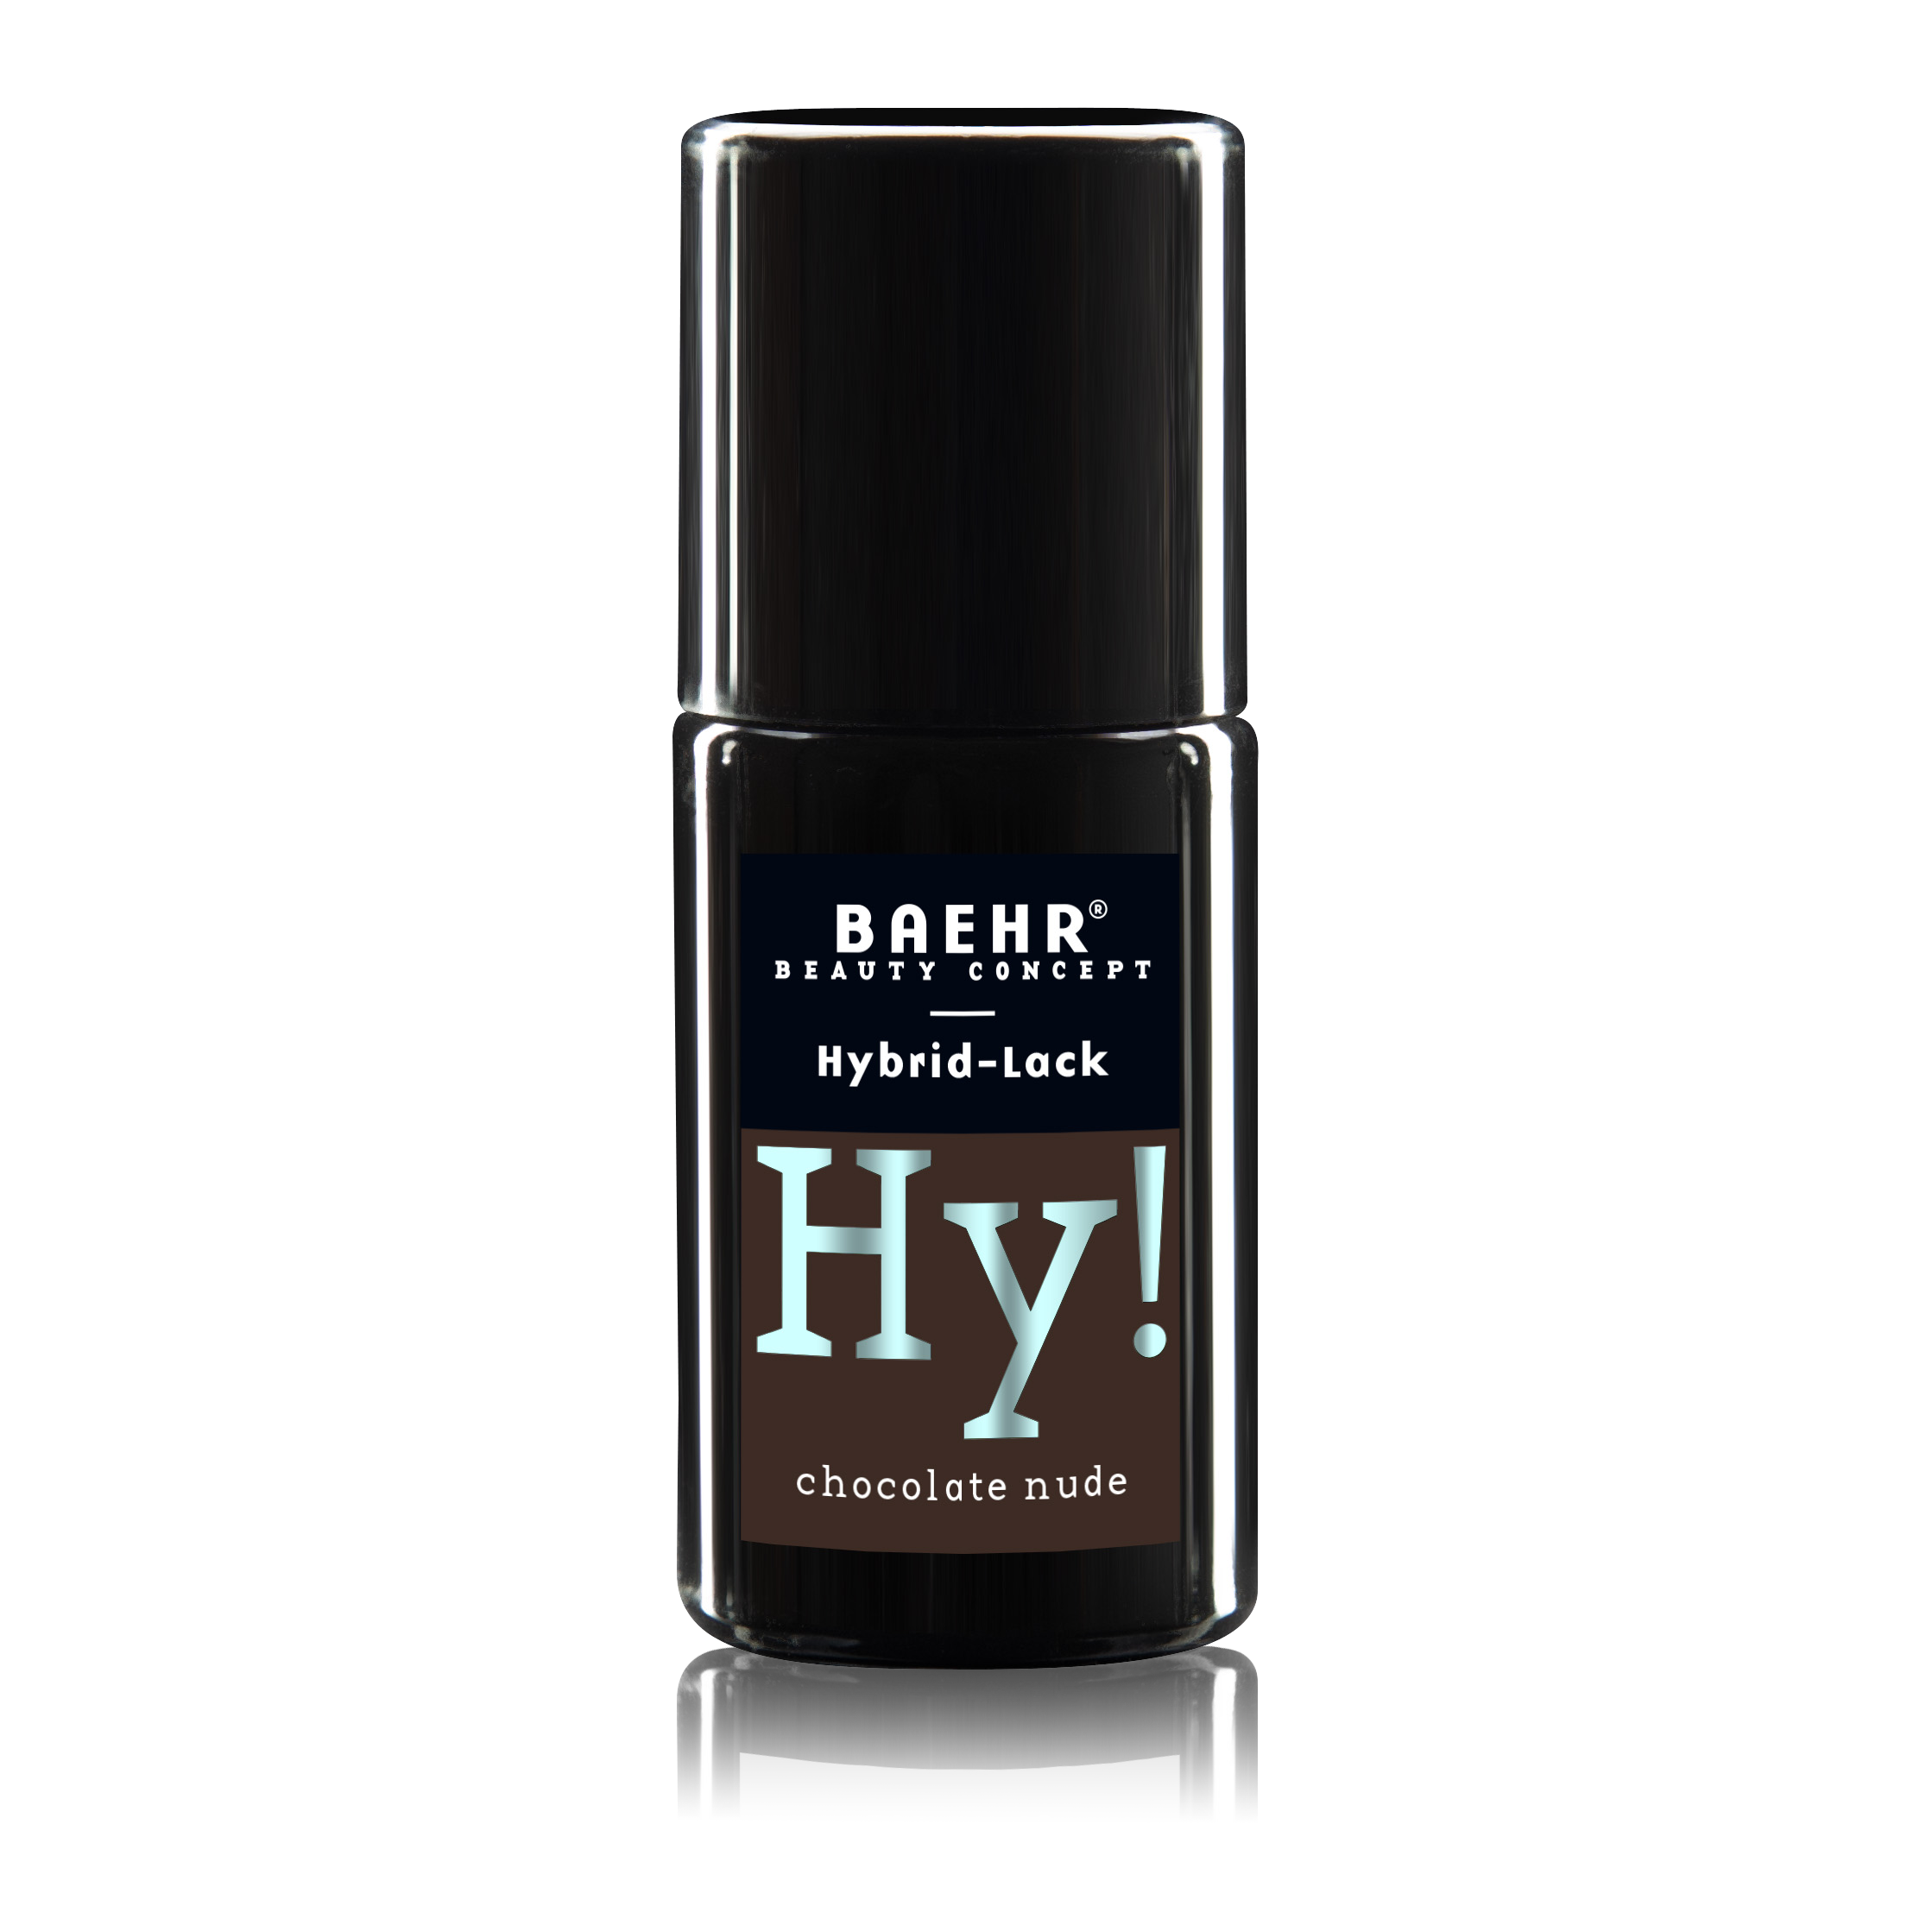 BAEHR BEAUTY CONCEPT - NAILS Hy! Hybrid-Lack, chocolate nude 8 ml